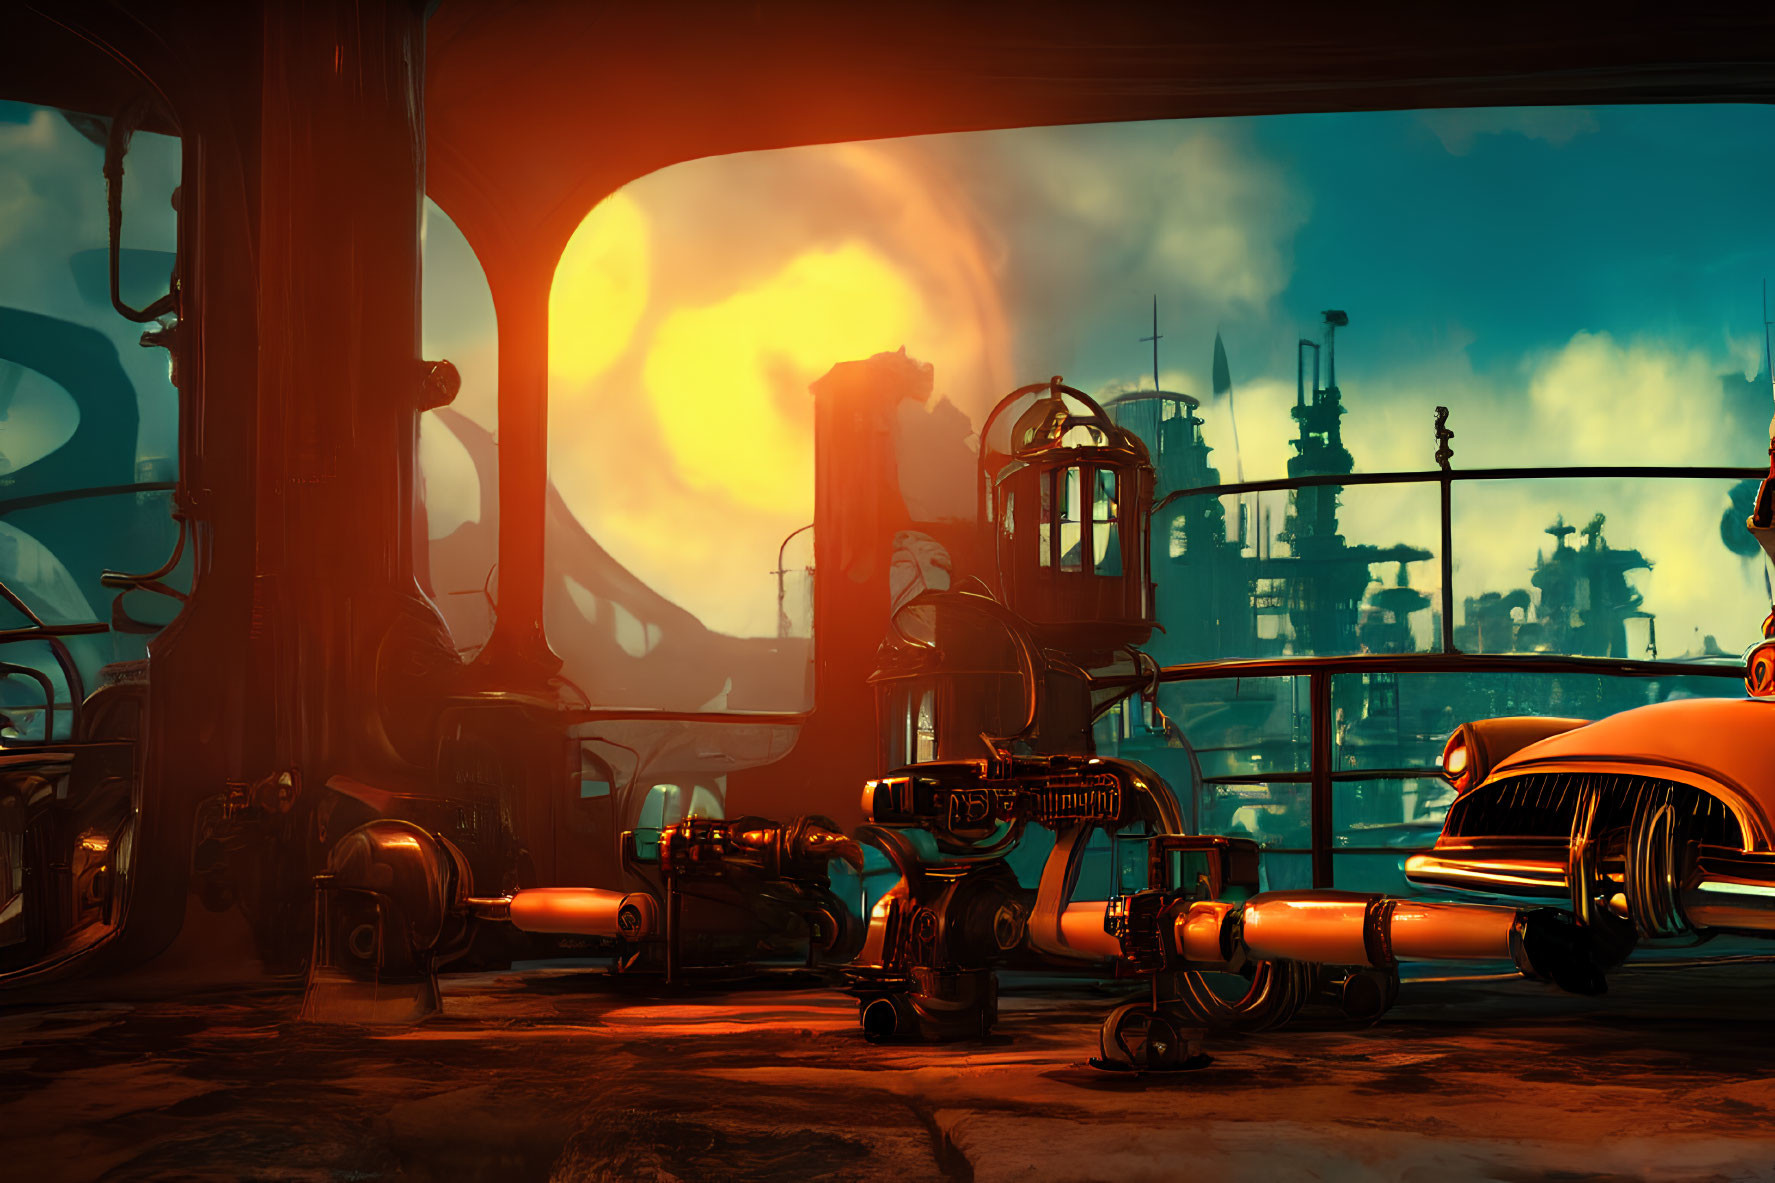 Stylized industrial interior with pipes, machinery, and sunset view